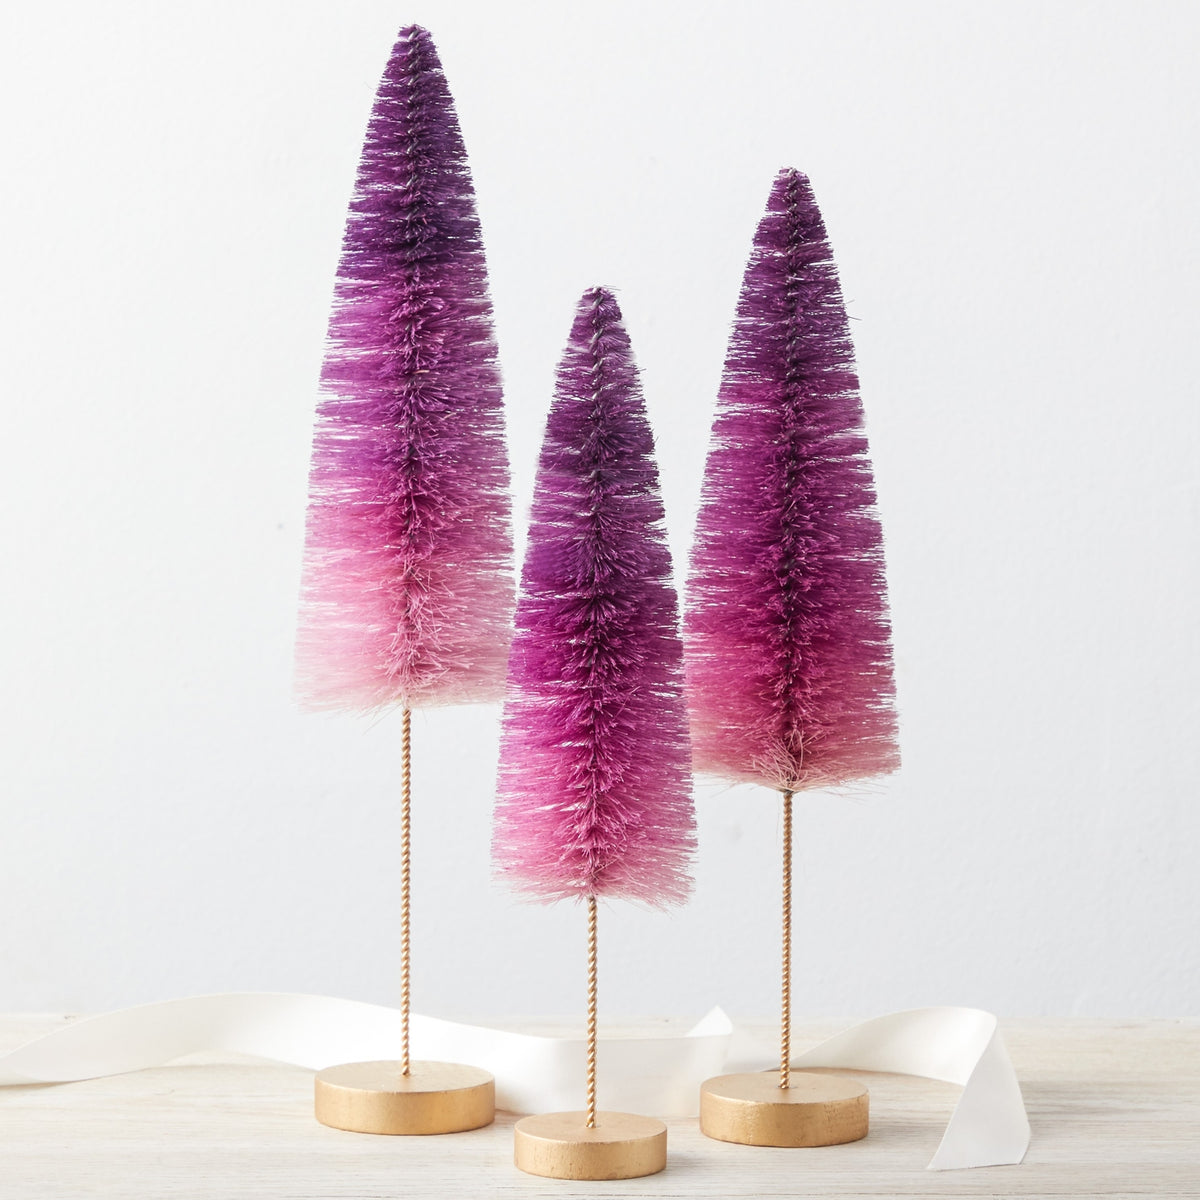 Purple Ombre Bottle Brush Trees in set of 3 with gold bases